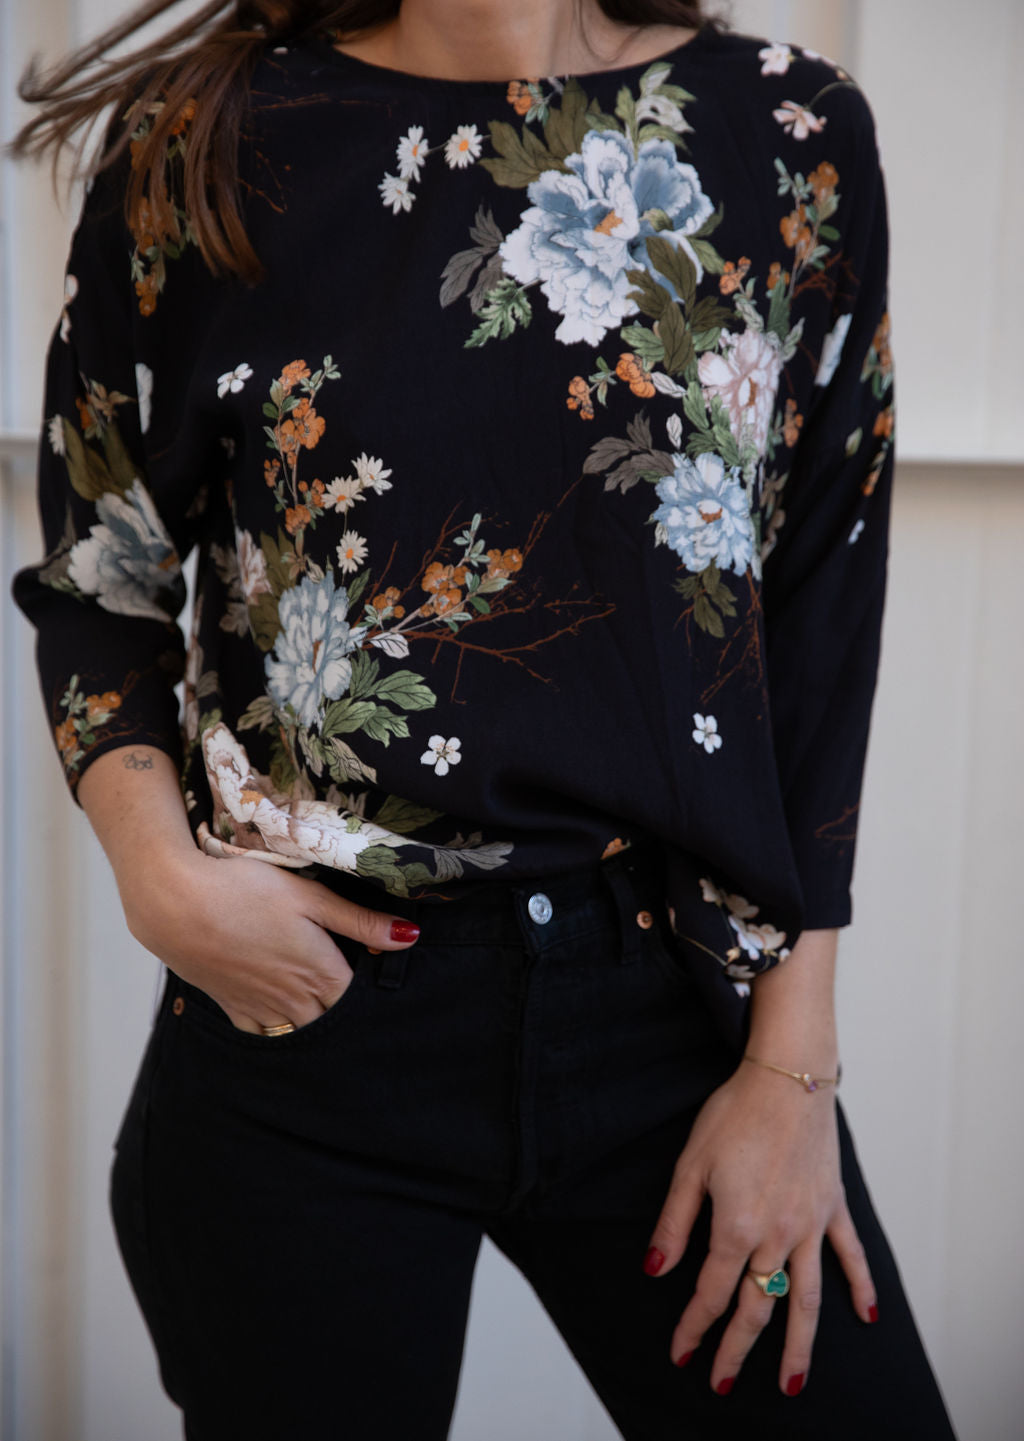 Helena floral top